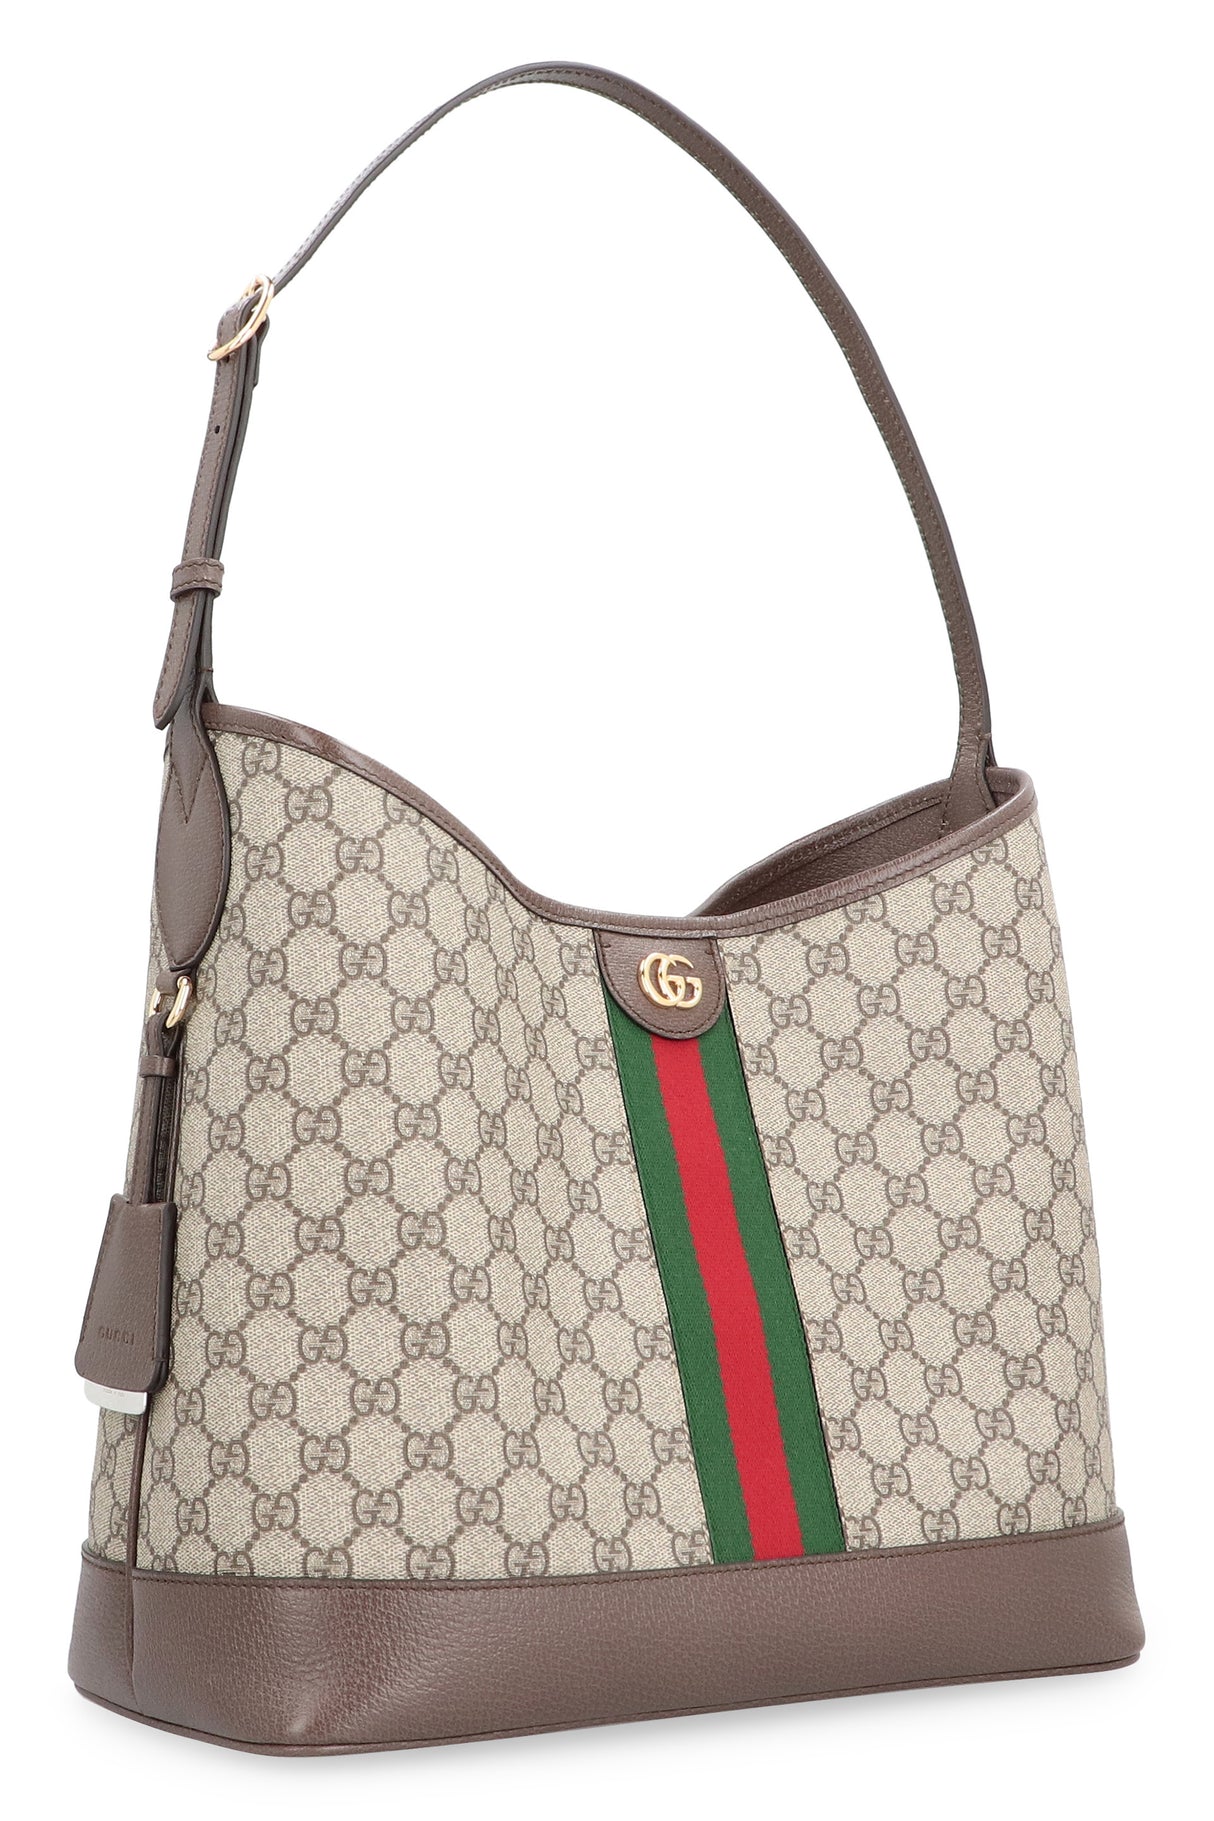 GUCCI GG Supreme Fabric Shoulder Bag with Leather Details and Gold-Tone Hardware